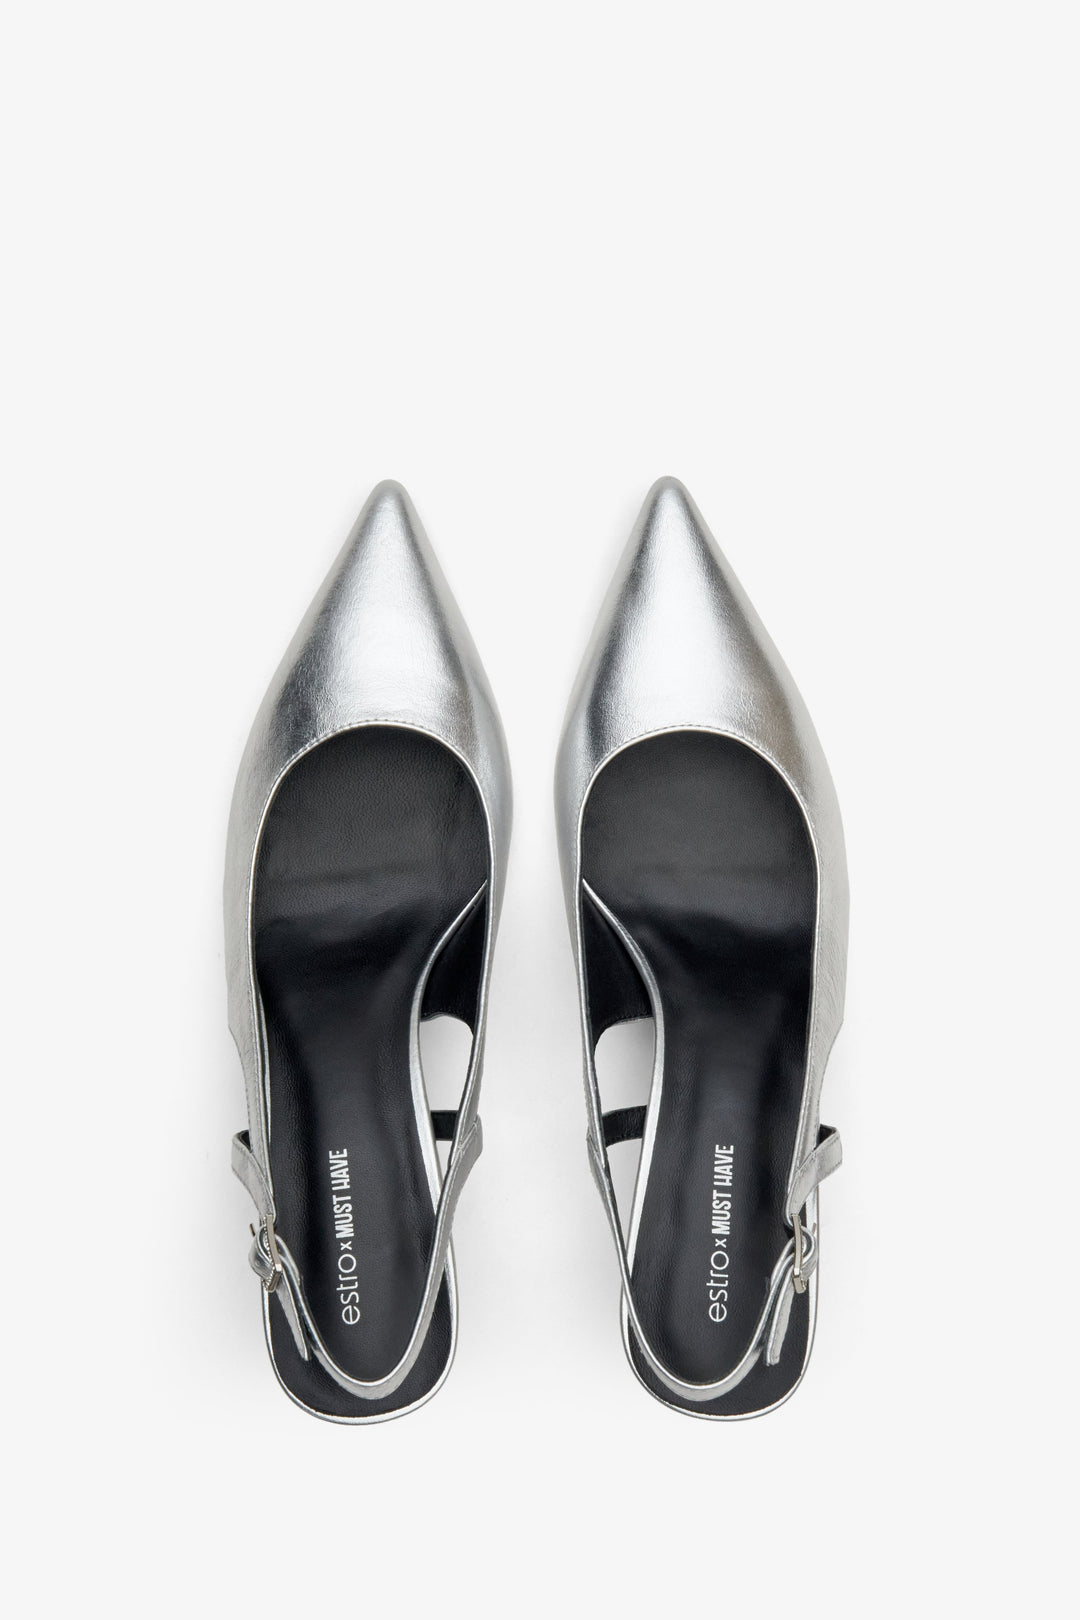 Estro x MustHave silver leather slingback pumps - top view presentation of the footwear.